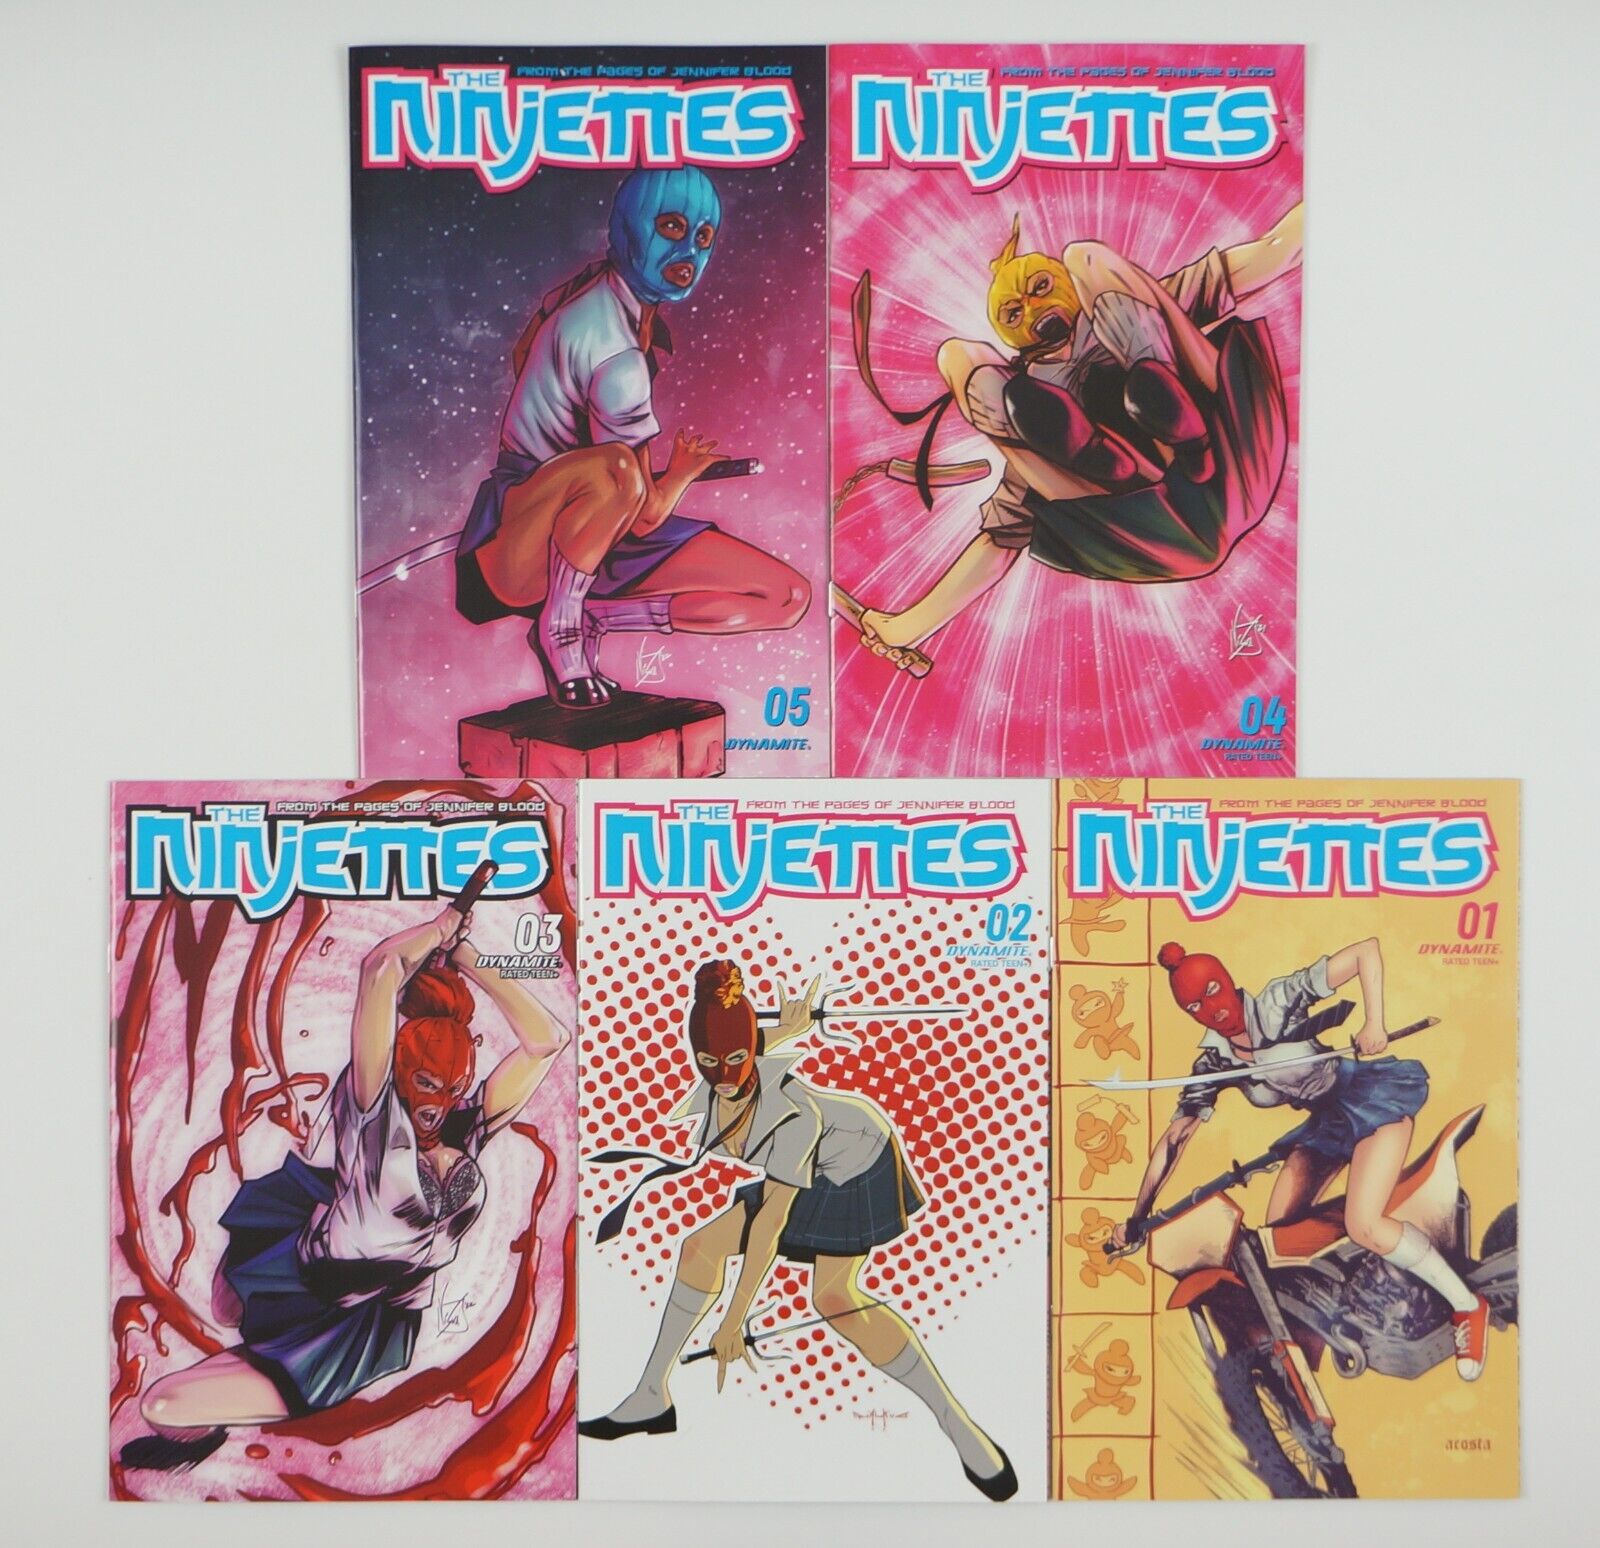 the Ninjettes Vol. 2 #1-5 VF/NM complete series Dynamite - all C variants set